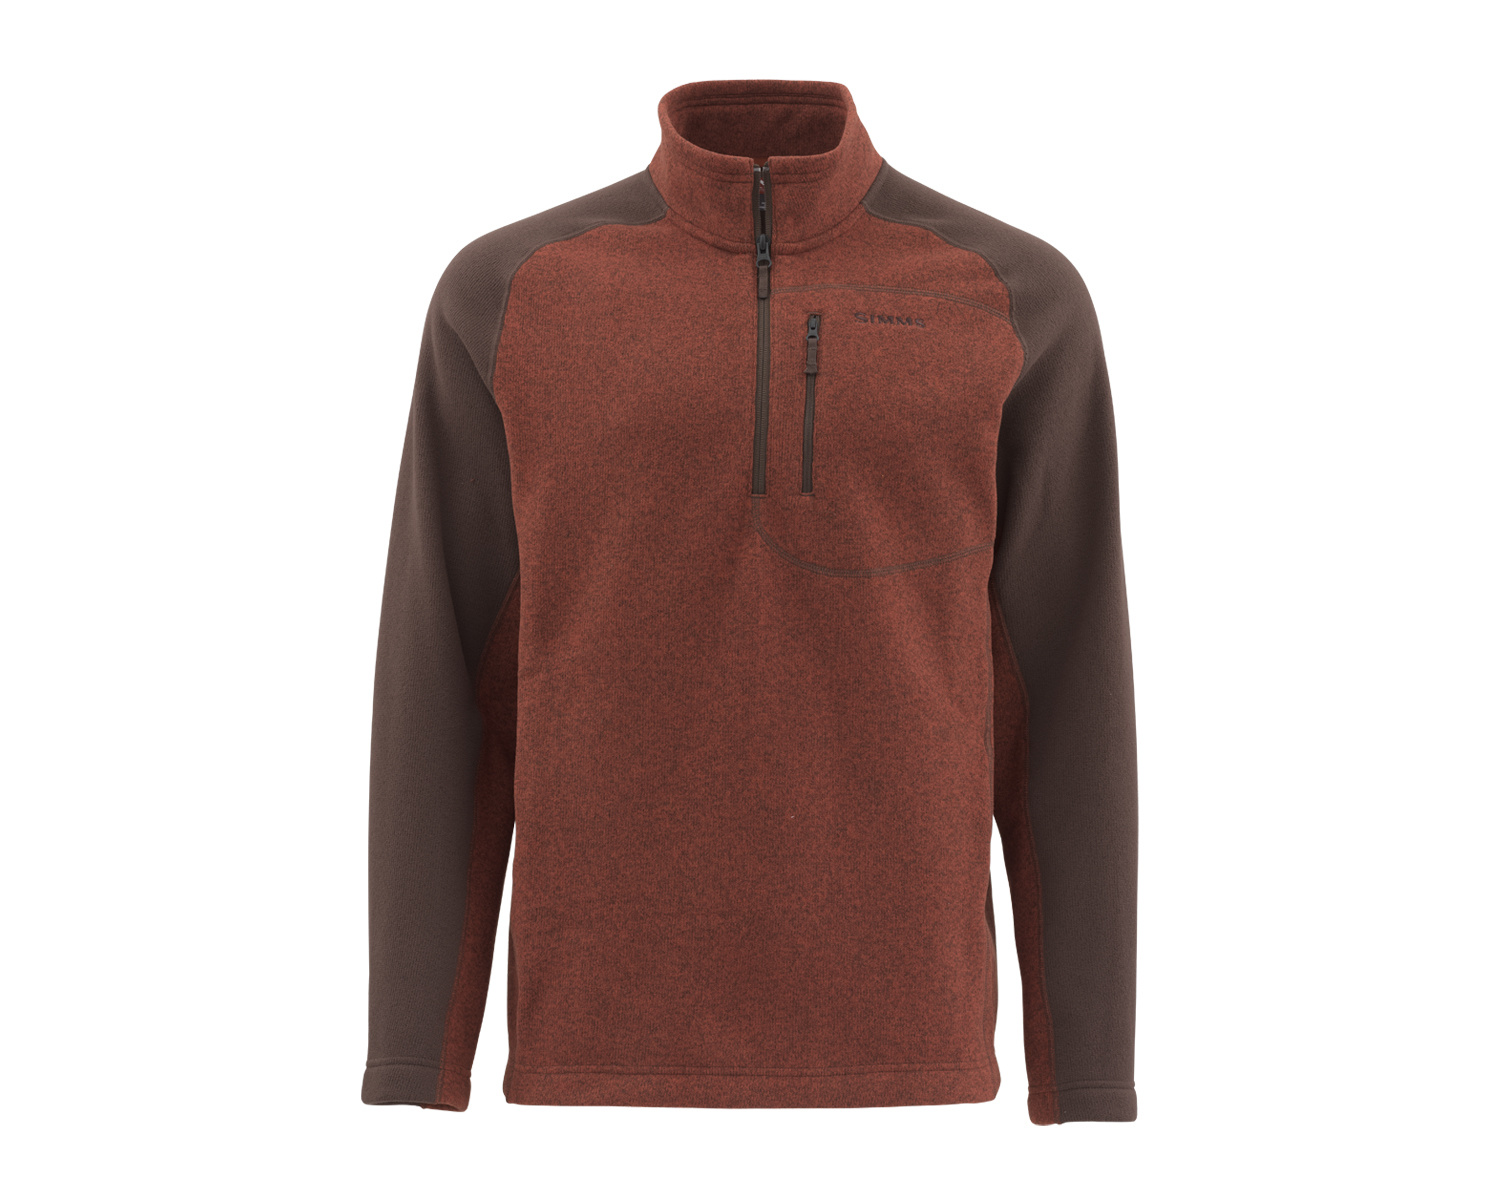 SIMMS SIMMS RIVERSHED SWEATER QUARTER ZIP - ON SALE